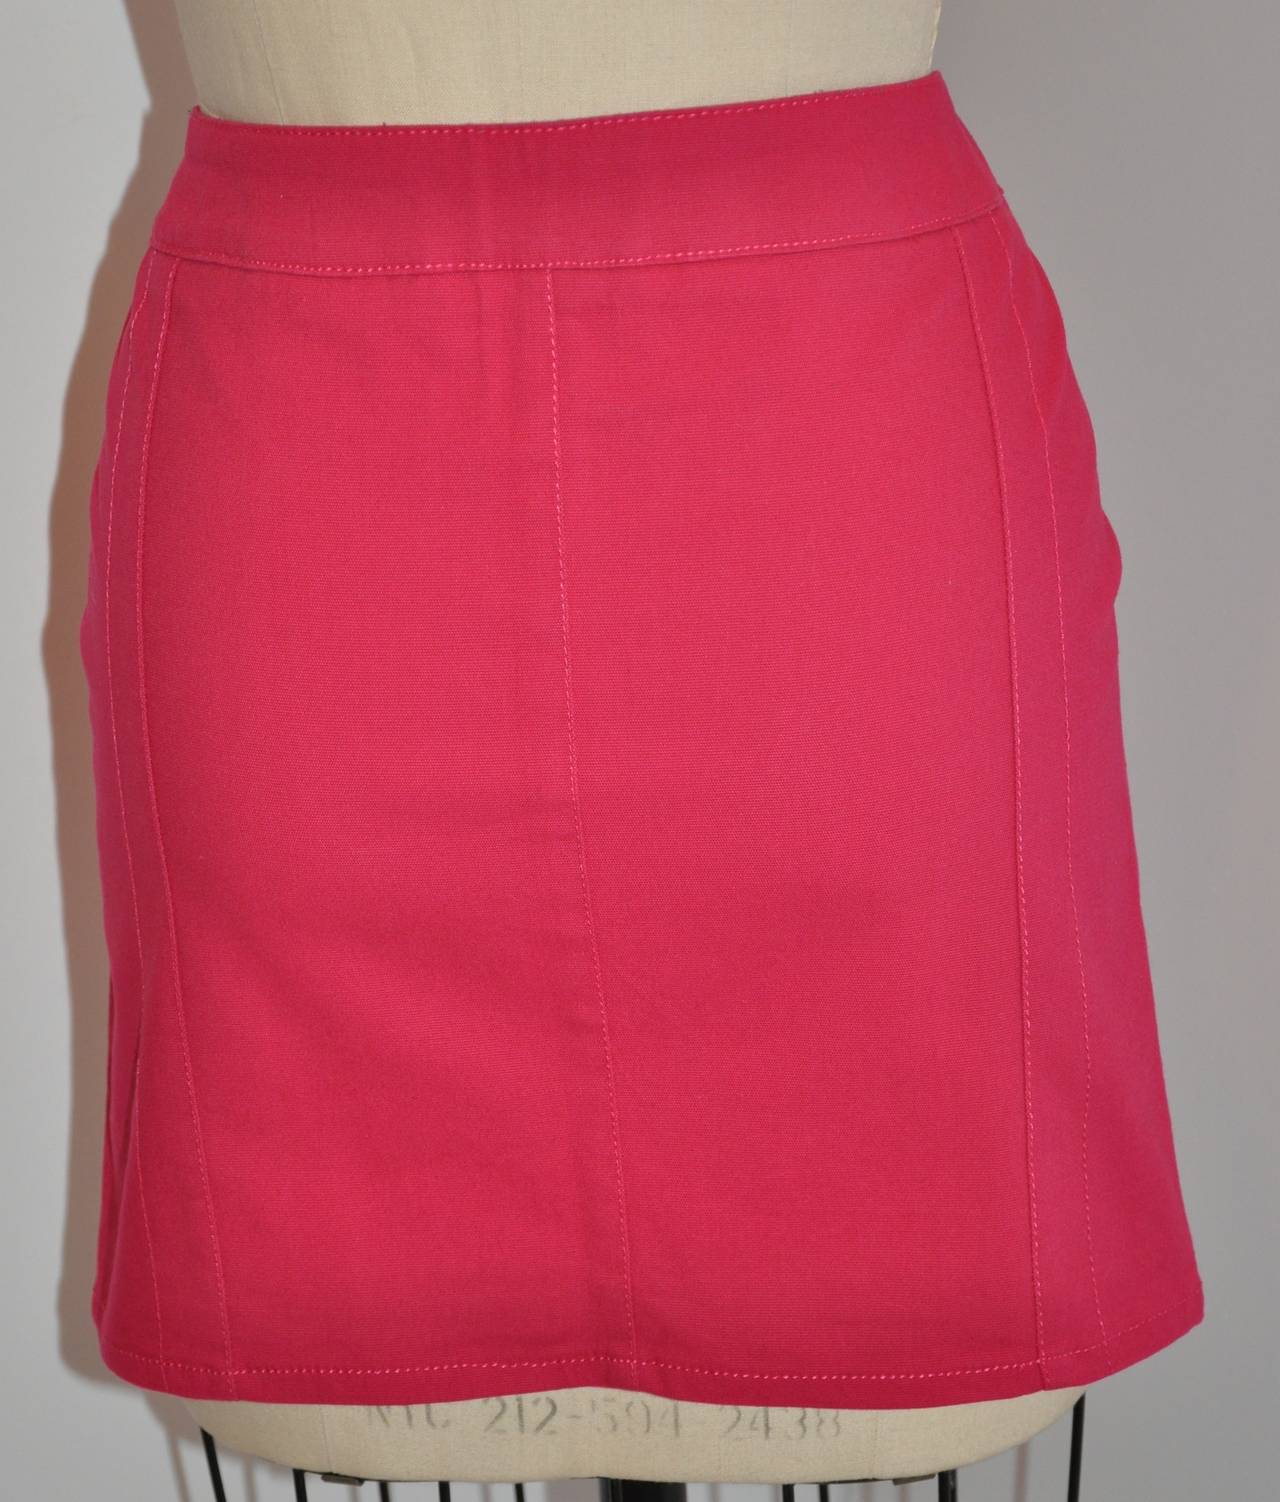 Gianni Versace bold fuchsia stretch mini skirt is wonderfully detailed with two buckles along with a front zipper which measures 5